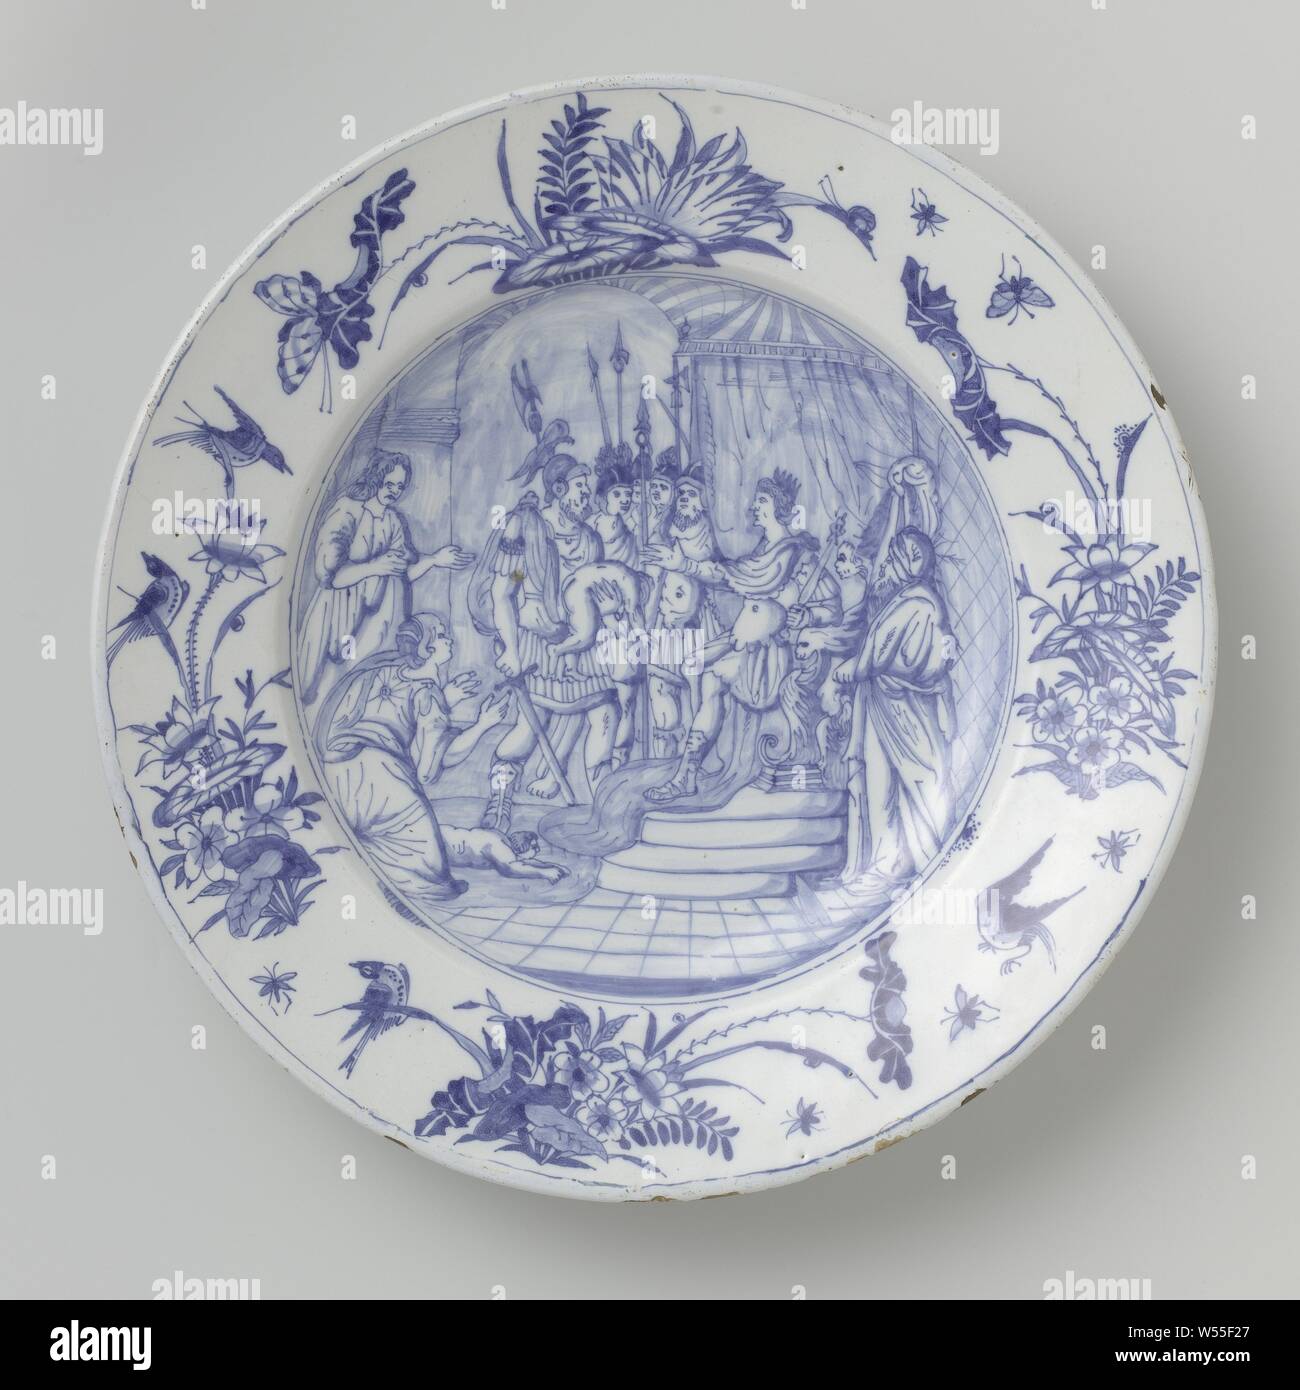 Saucer, painted with the judgment of King Solomon, Saucer of faience, painted blue in the glaze. On the shelf a representation of the Judgment of King Solomon. On the border flowers, butterflies and birds after a Chinese example, the judgment of Solomon (1 Kings 3: 16-28), Willem Jansz. Verstraeten (attributed to workshop of), Haarlem, c. 1655 - c. 1660, h 6.5 cm × d 38.7 cm Stock Photo